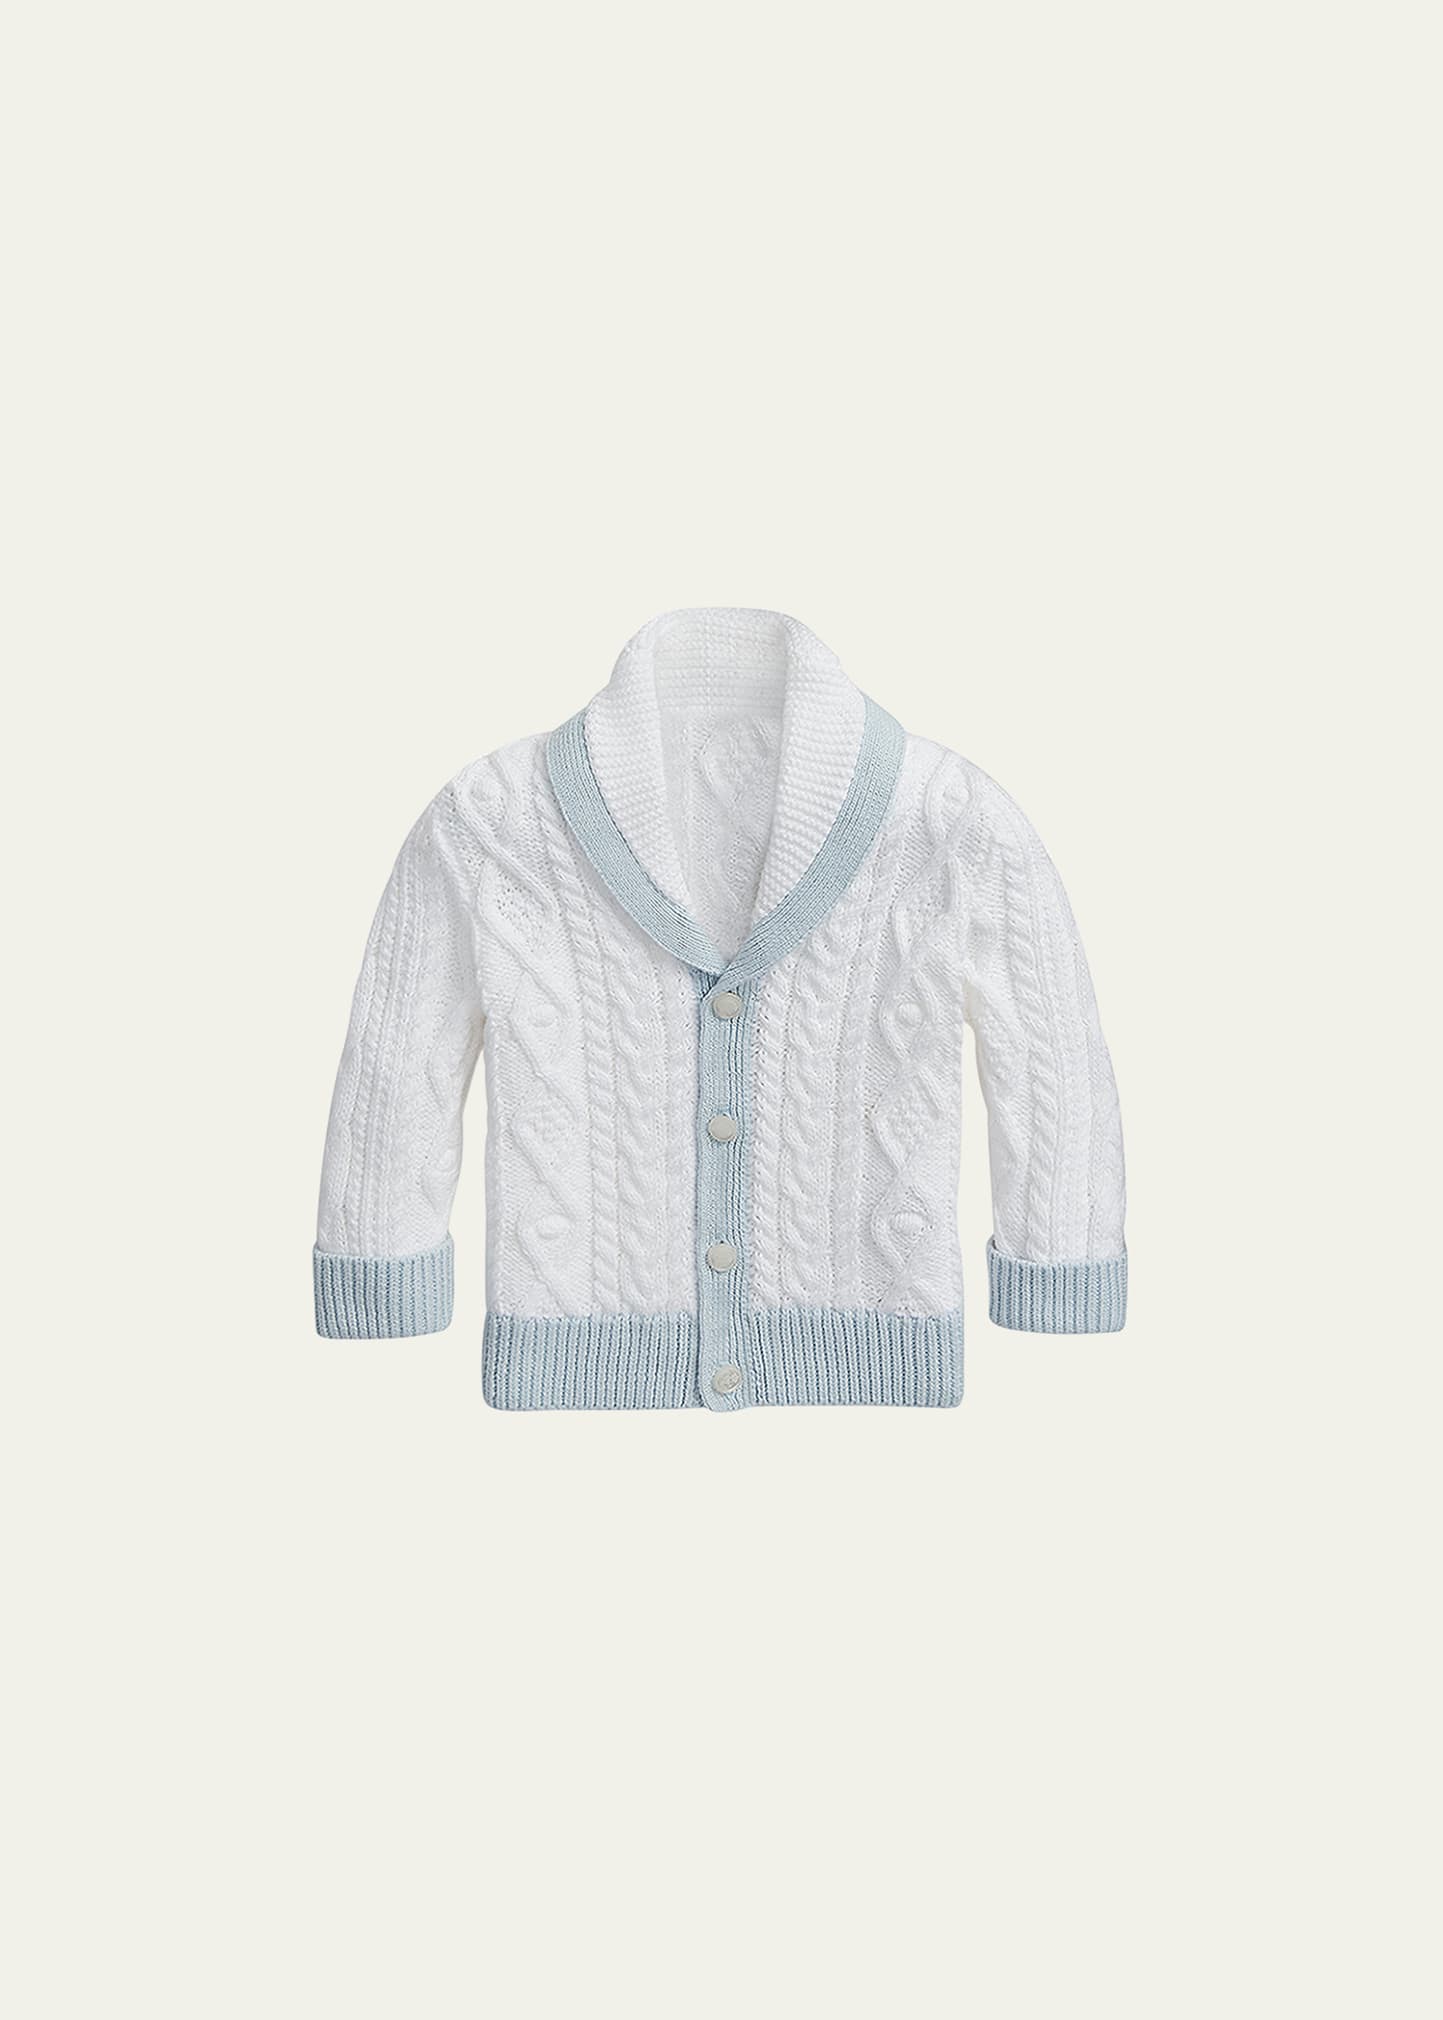 Ralph Lauren Kids' Boy's Shawl Neck Cable Knit Cardigan In White